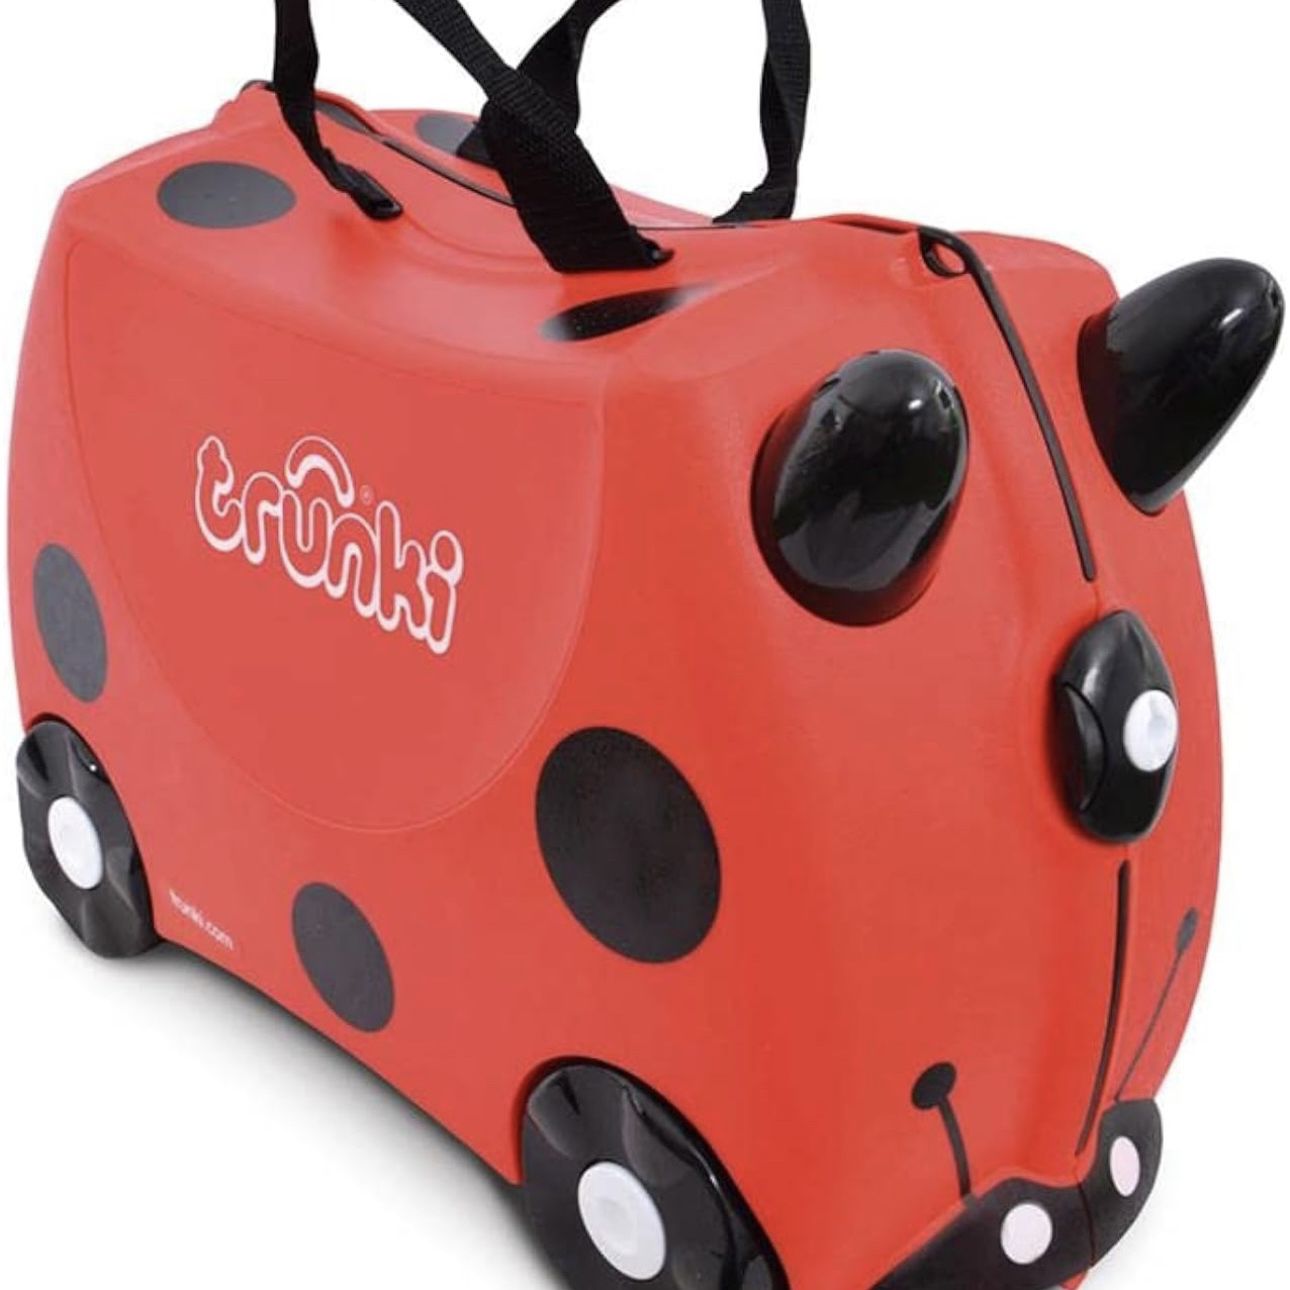 Trunki Ride-On Kids Suitcase | Tow-Along Toddler Luggage | Carry-On Cute Bag with Wheels | Kids Luggage and Airplane Travel Essentials: Harley Ladybug